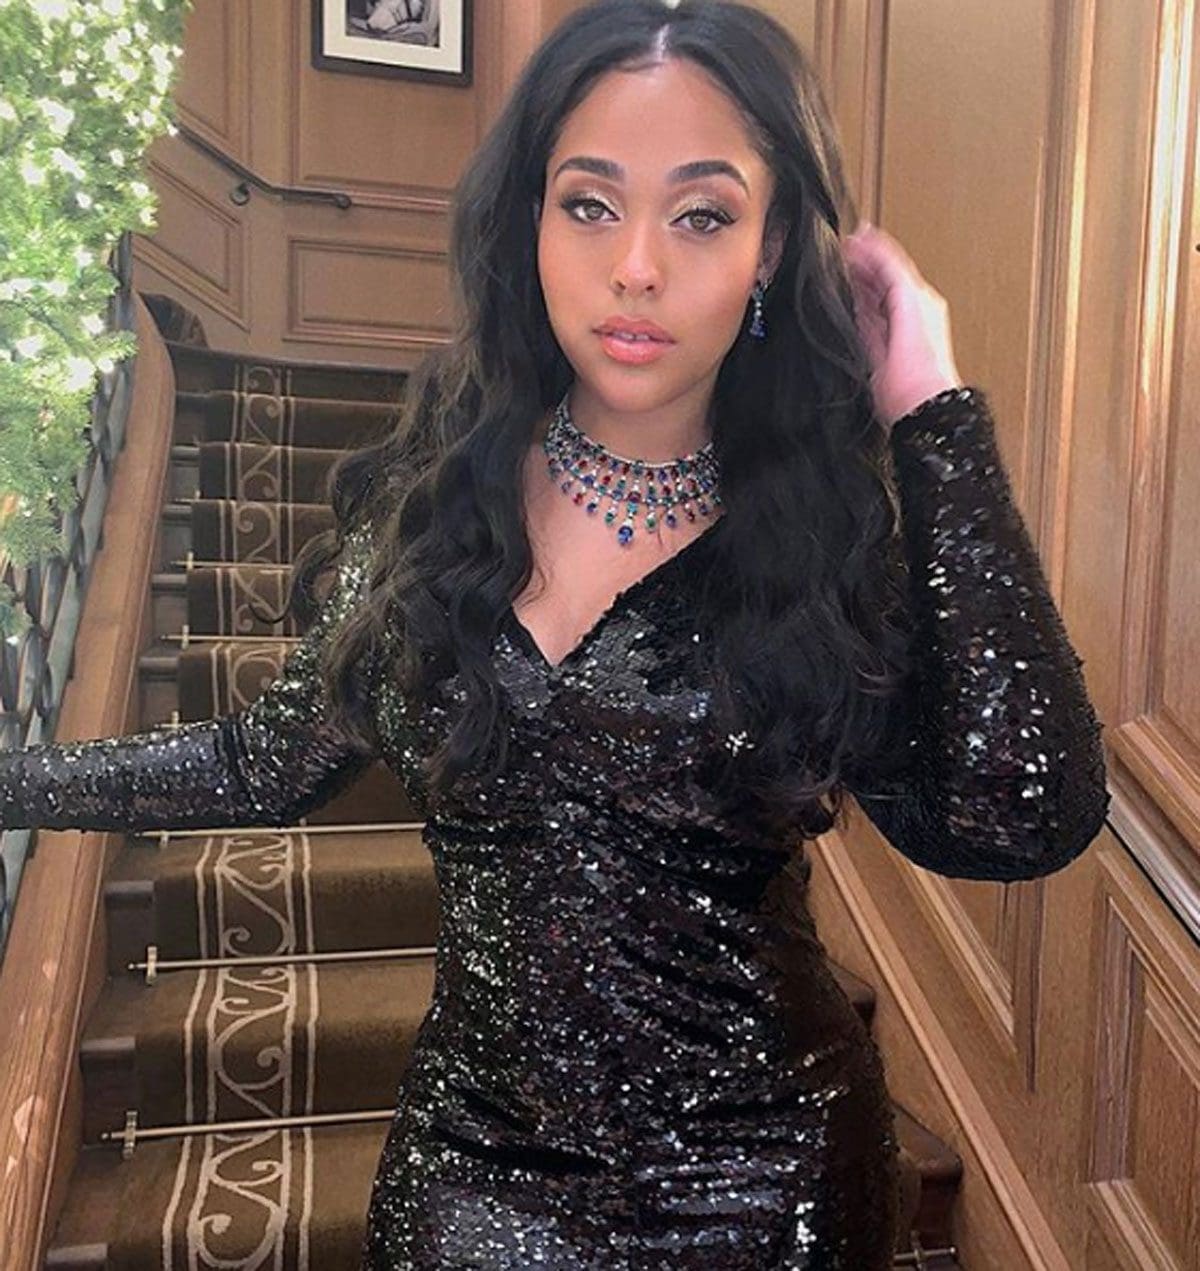 Jordyn Woods Shows It All On Her Terrace - Check Out Her Voluptuous Curves In These Photos